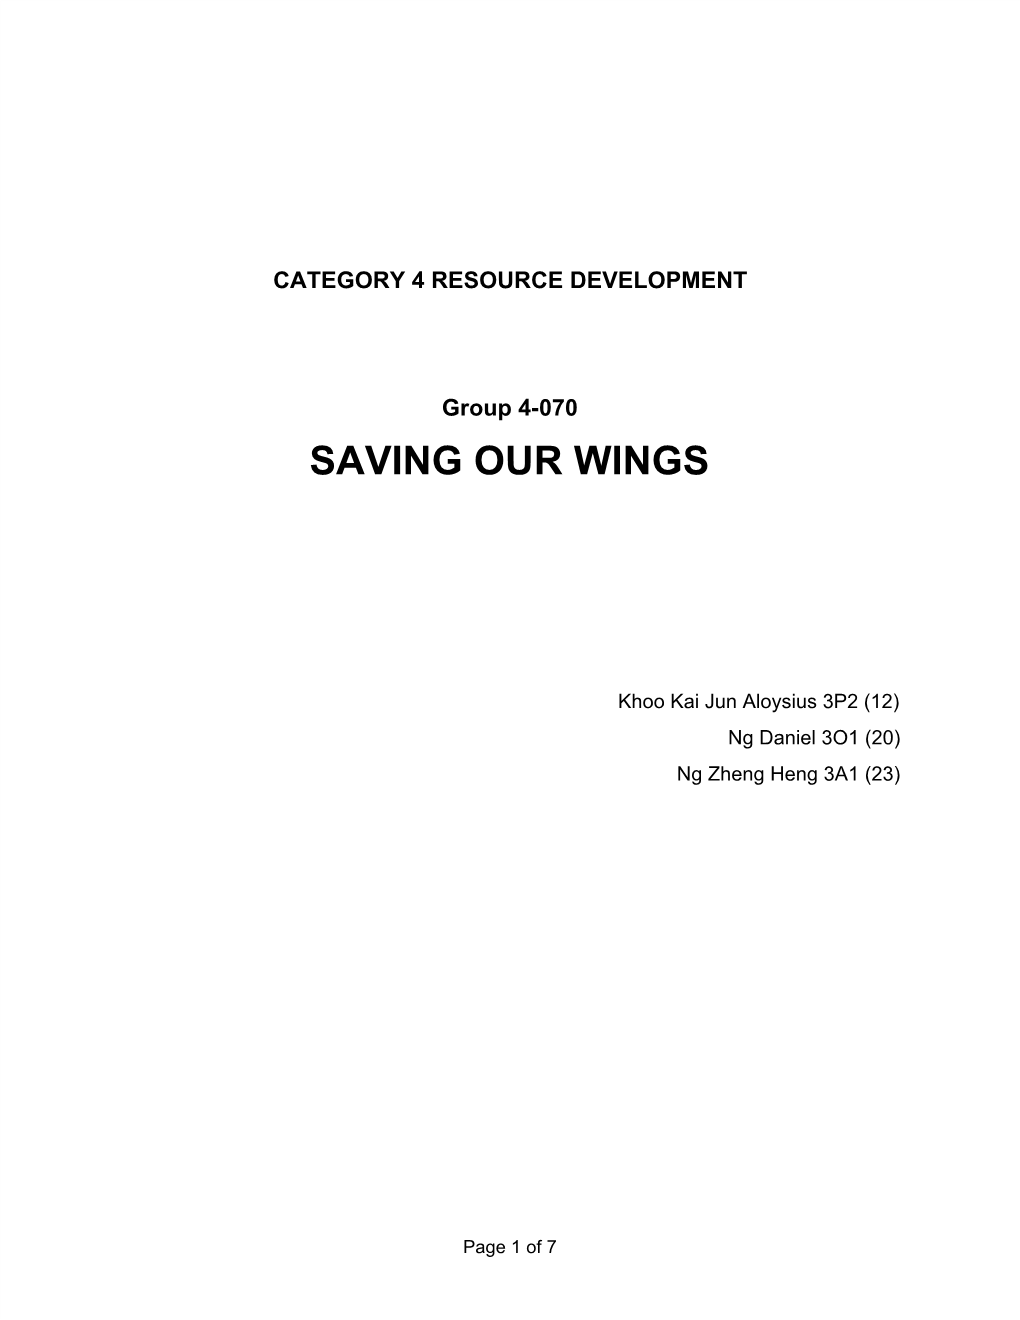 4-070 Saving Our Wings